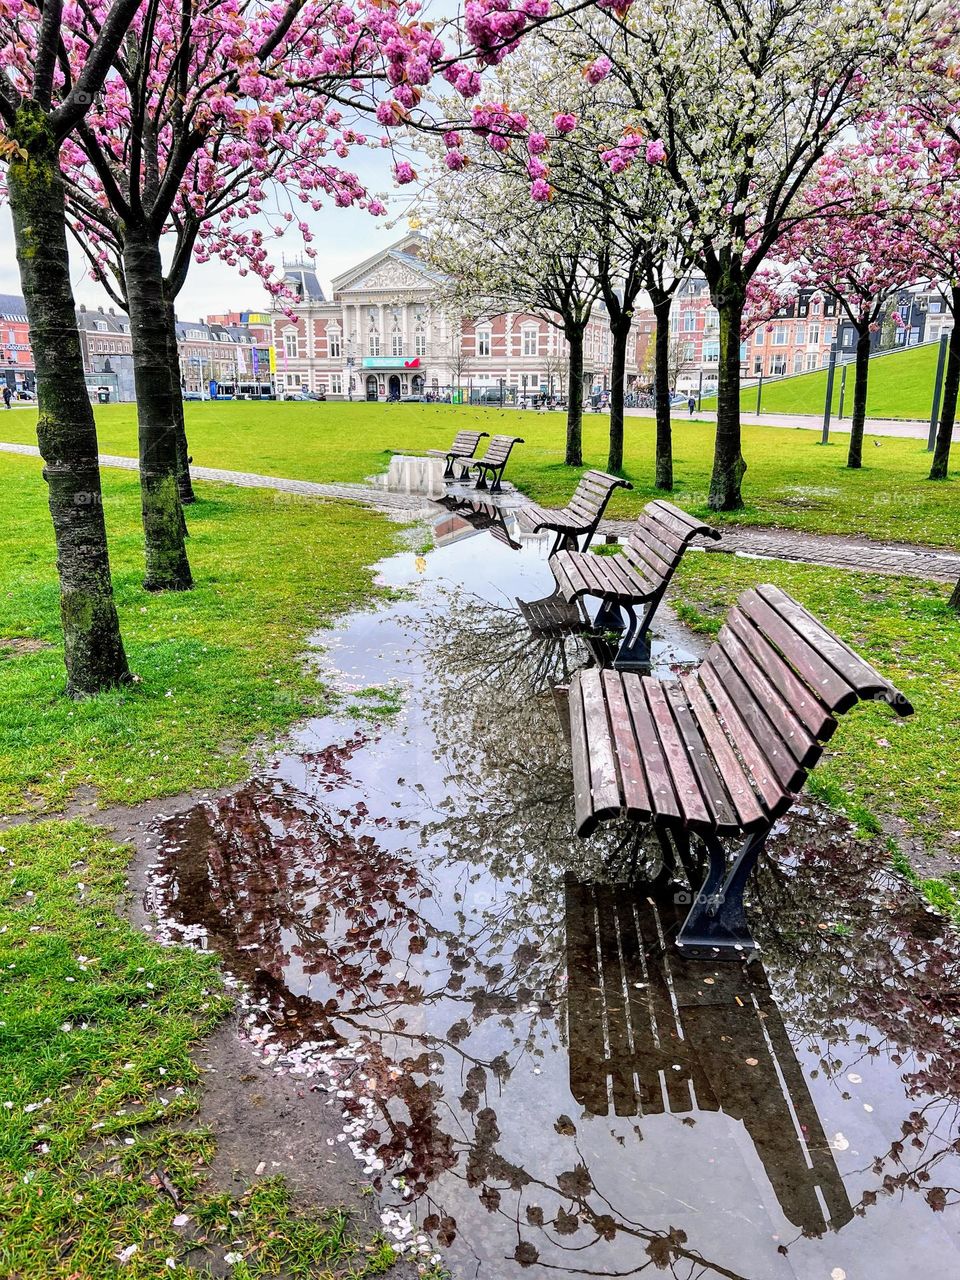 Beautiful spring city view with sakura cherry blossom blooming trees growing on the green lawn and park benches reflecting in the still puddle